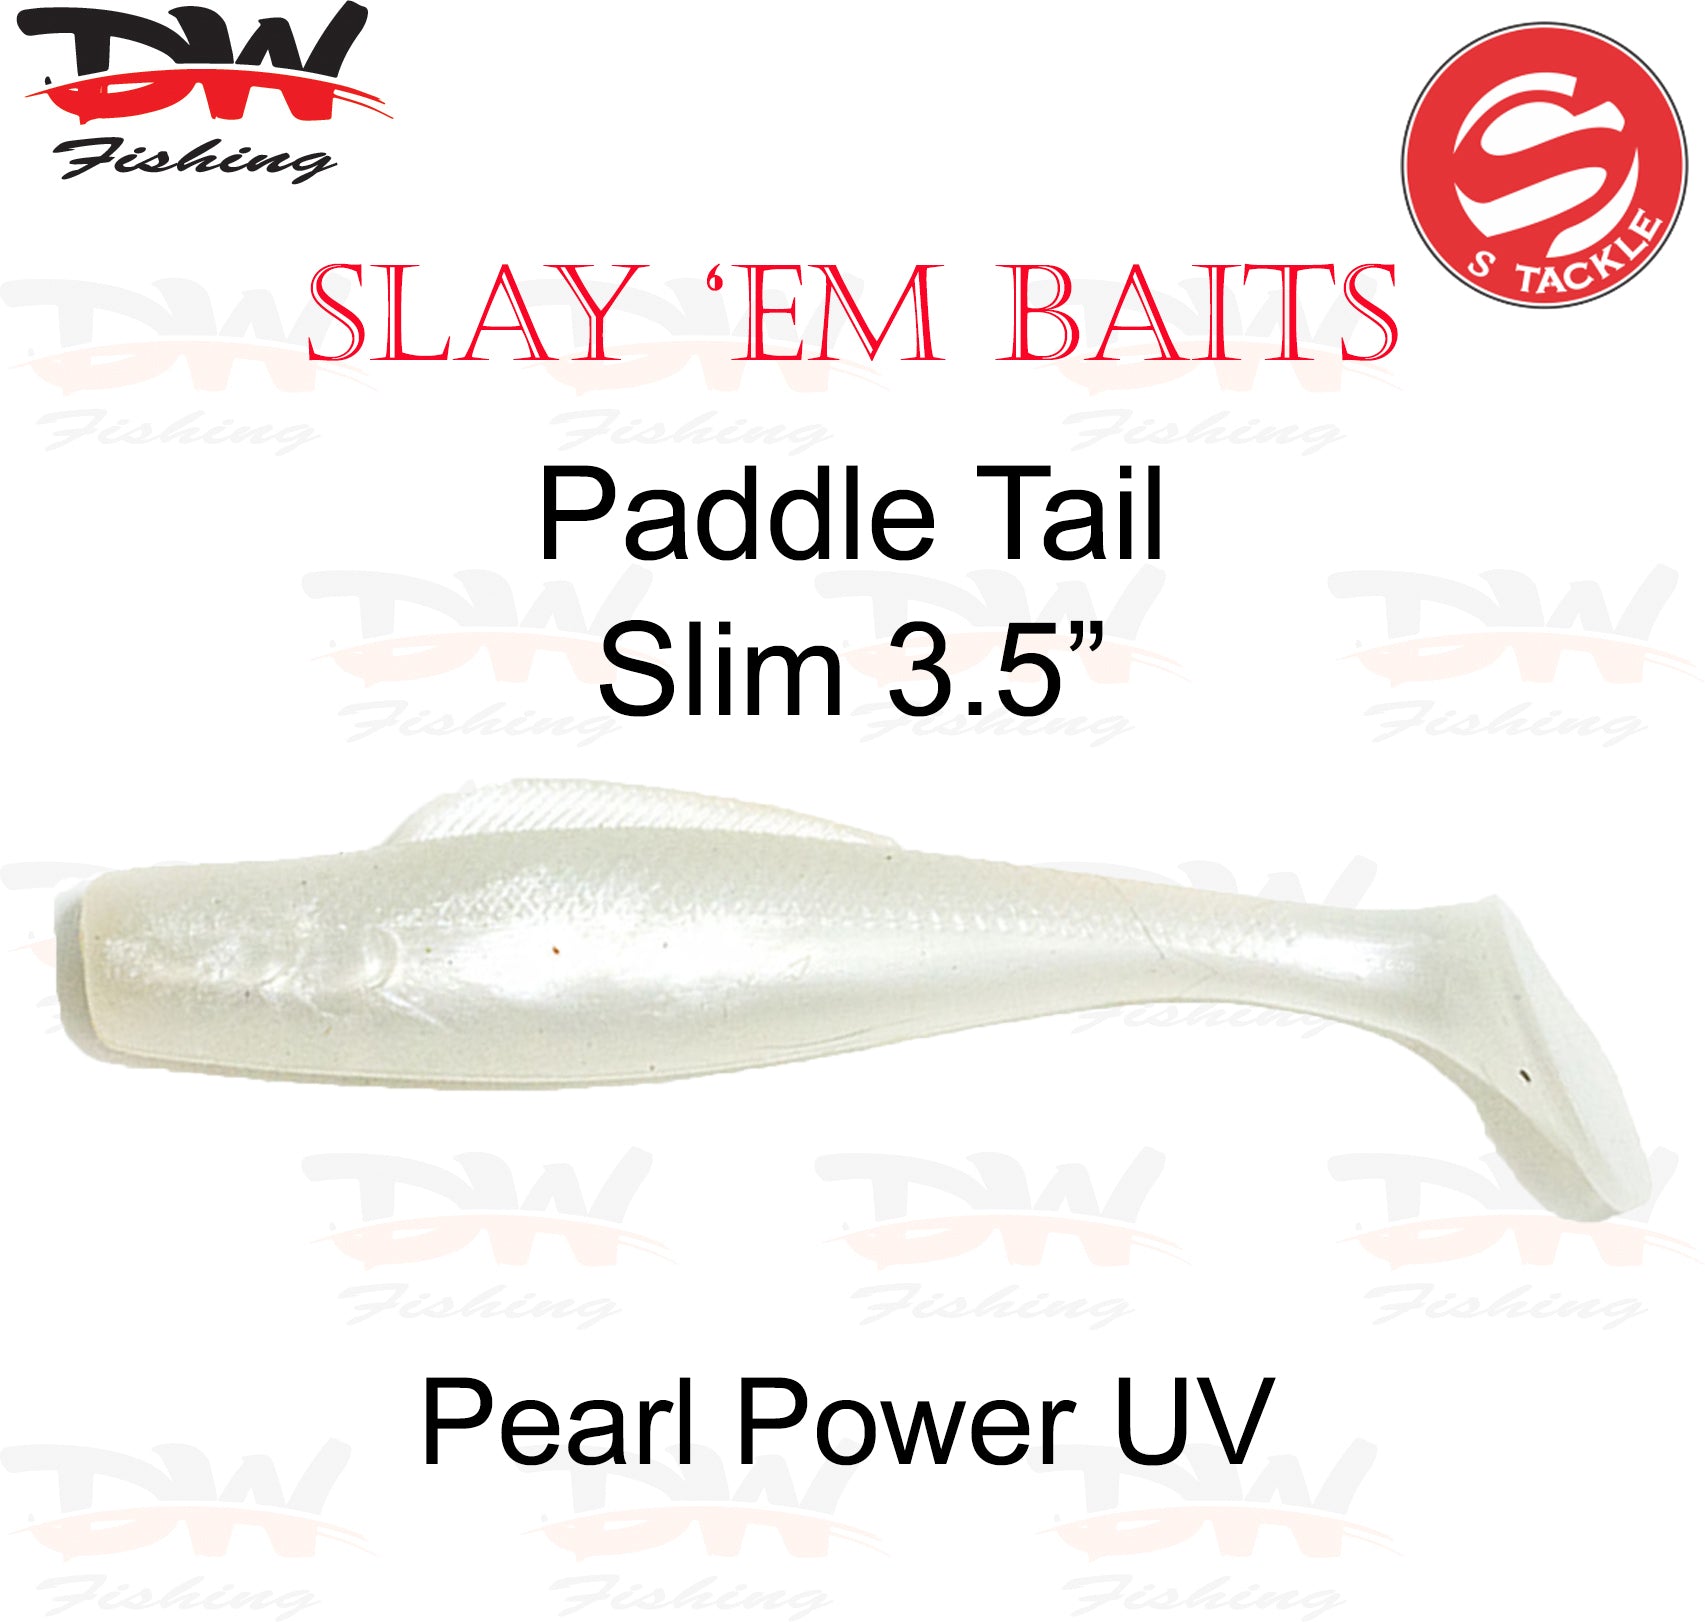 S Tackle 3.5 inch paddle tail slim soft plastic lure Colour Pearl Power UV